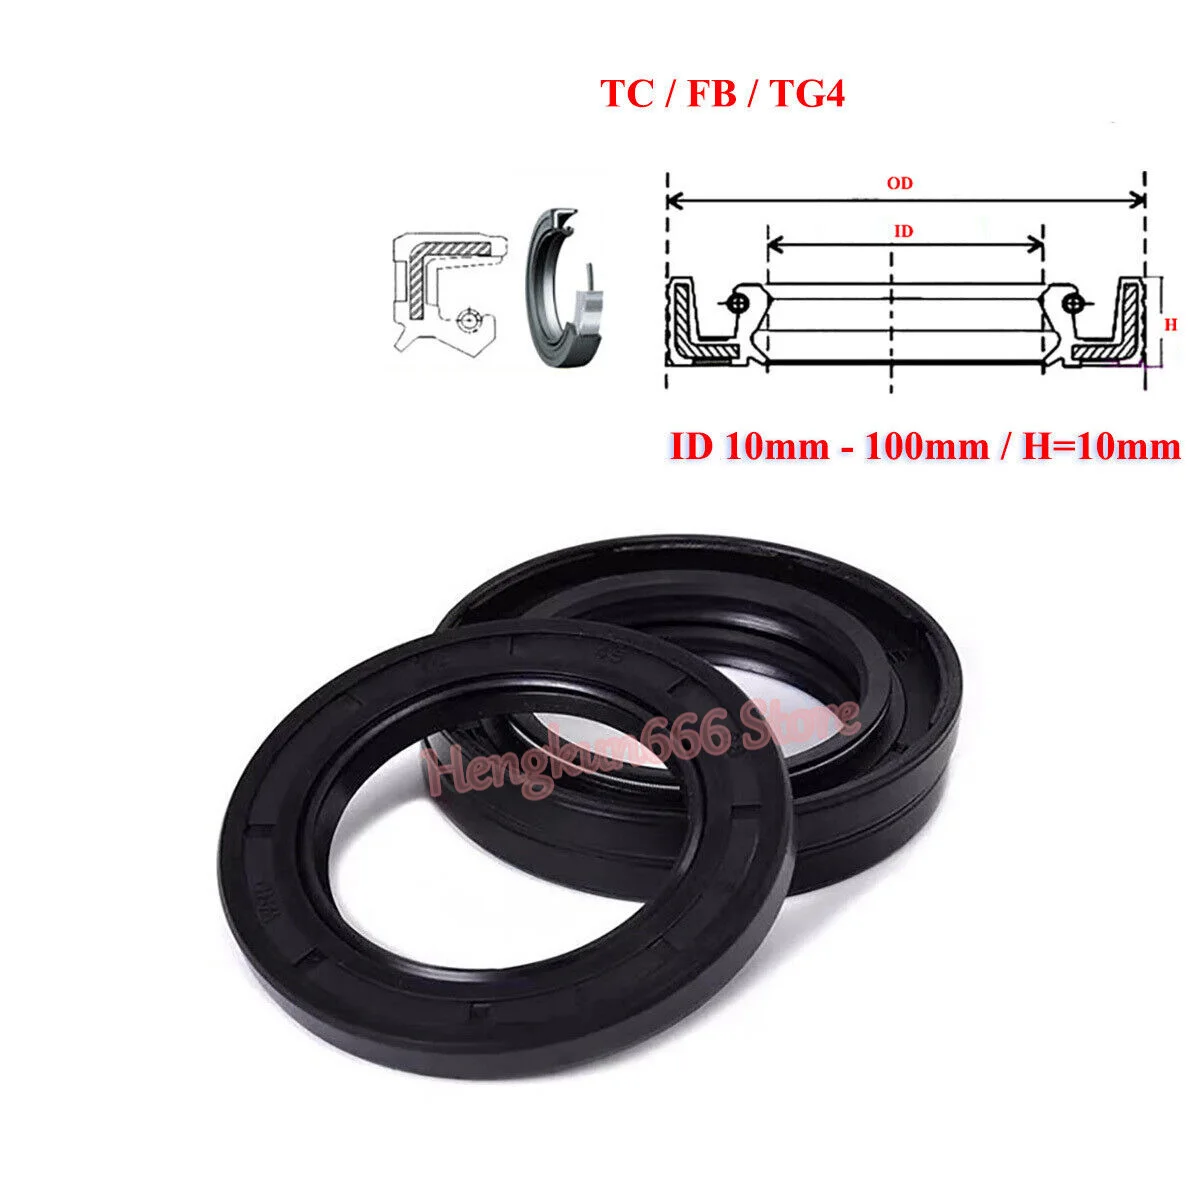 

ID 10 - 100mm Thickness 10mm TC/FB/TG4 Skeleton Oil Sealing Rings NBR Nitrile Rubber Double Lip Seal Gasket for Rotation Shaft